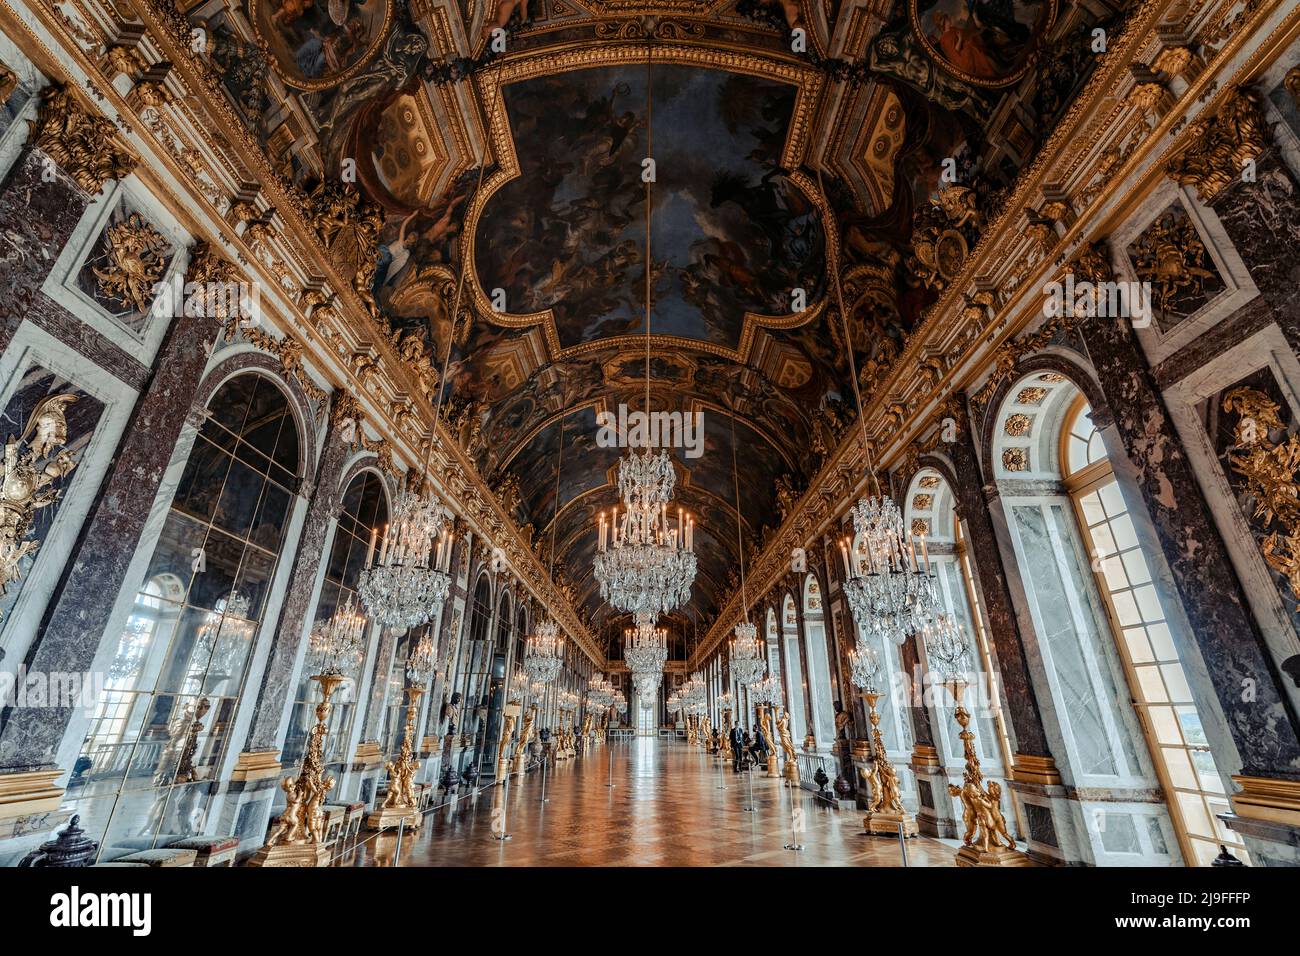 VERSAILLES, FRANCE - MAY 20 2022: The Hall of Mirrors (Galerie des Glaces) of the Royal Palace of Versailles in France Stock Photo